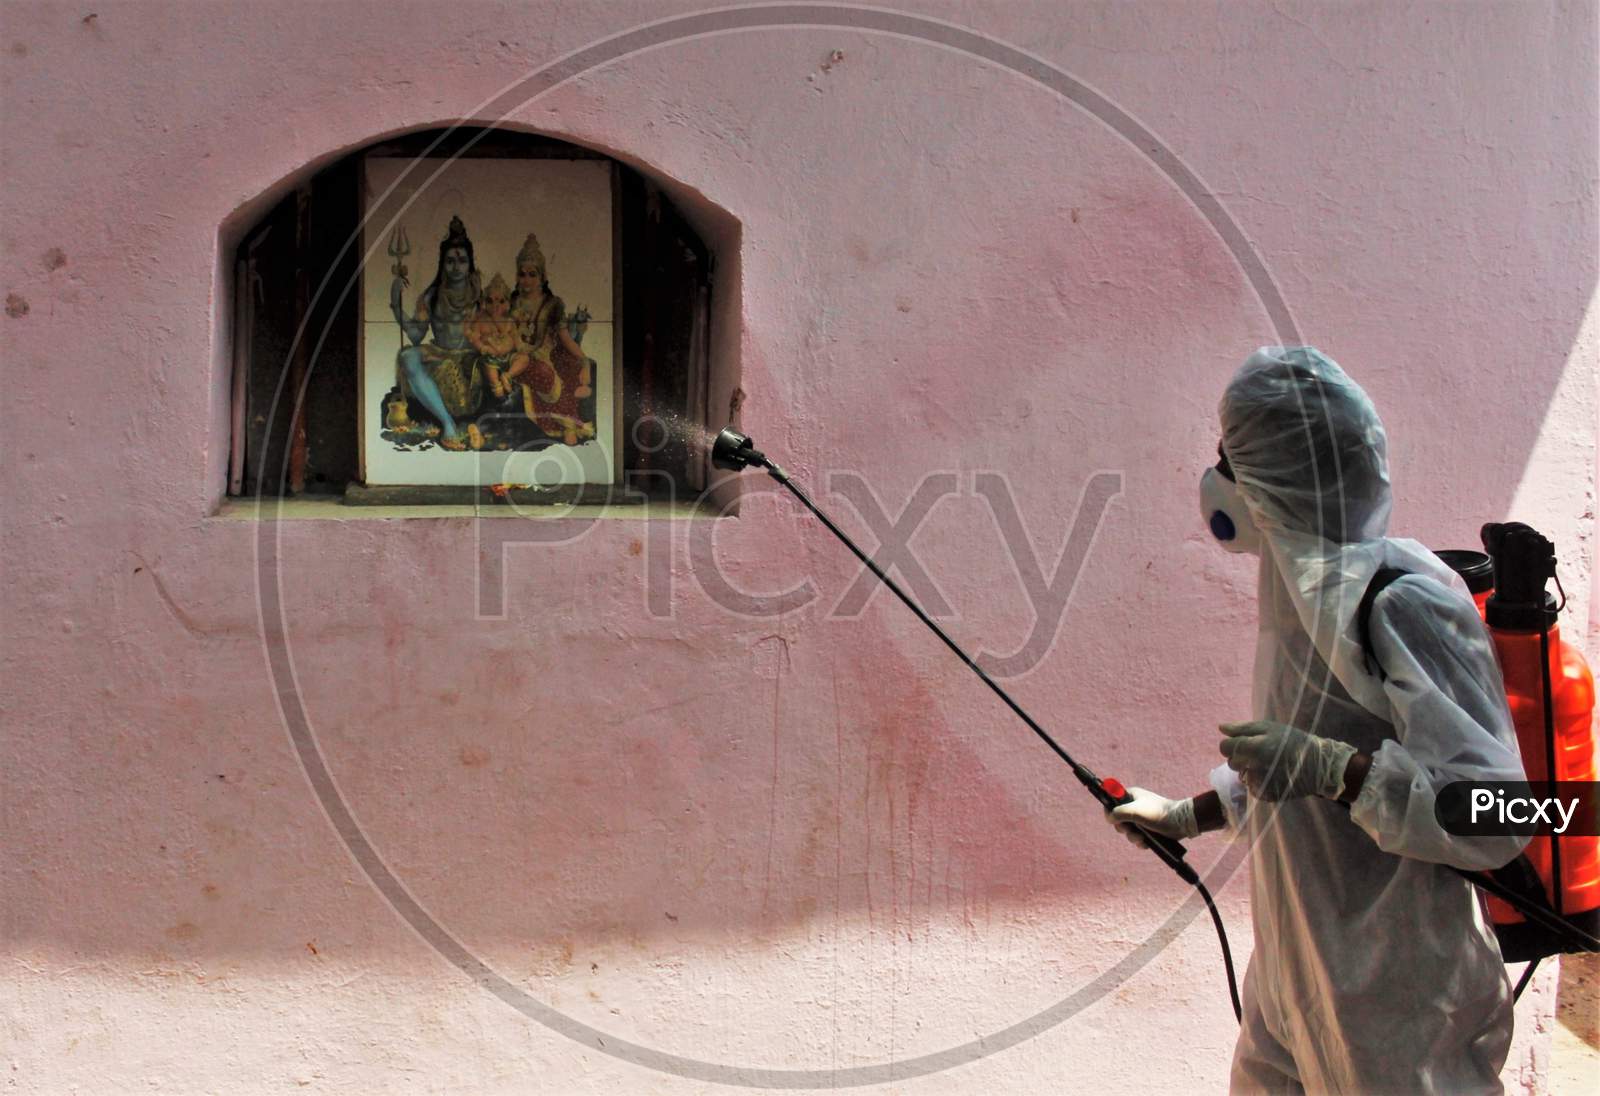 A worker wearing a protective suit disinfects a temple as a preventive measure against the spread of coronavirus disease (COVID-19) in Mumbai, India on March 28, 2020.